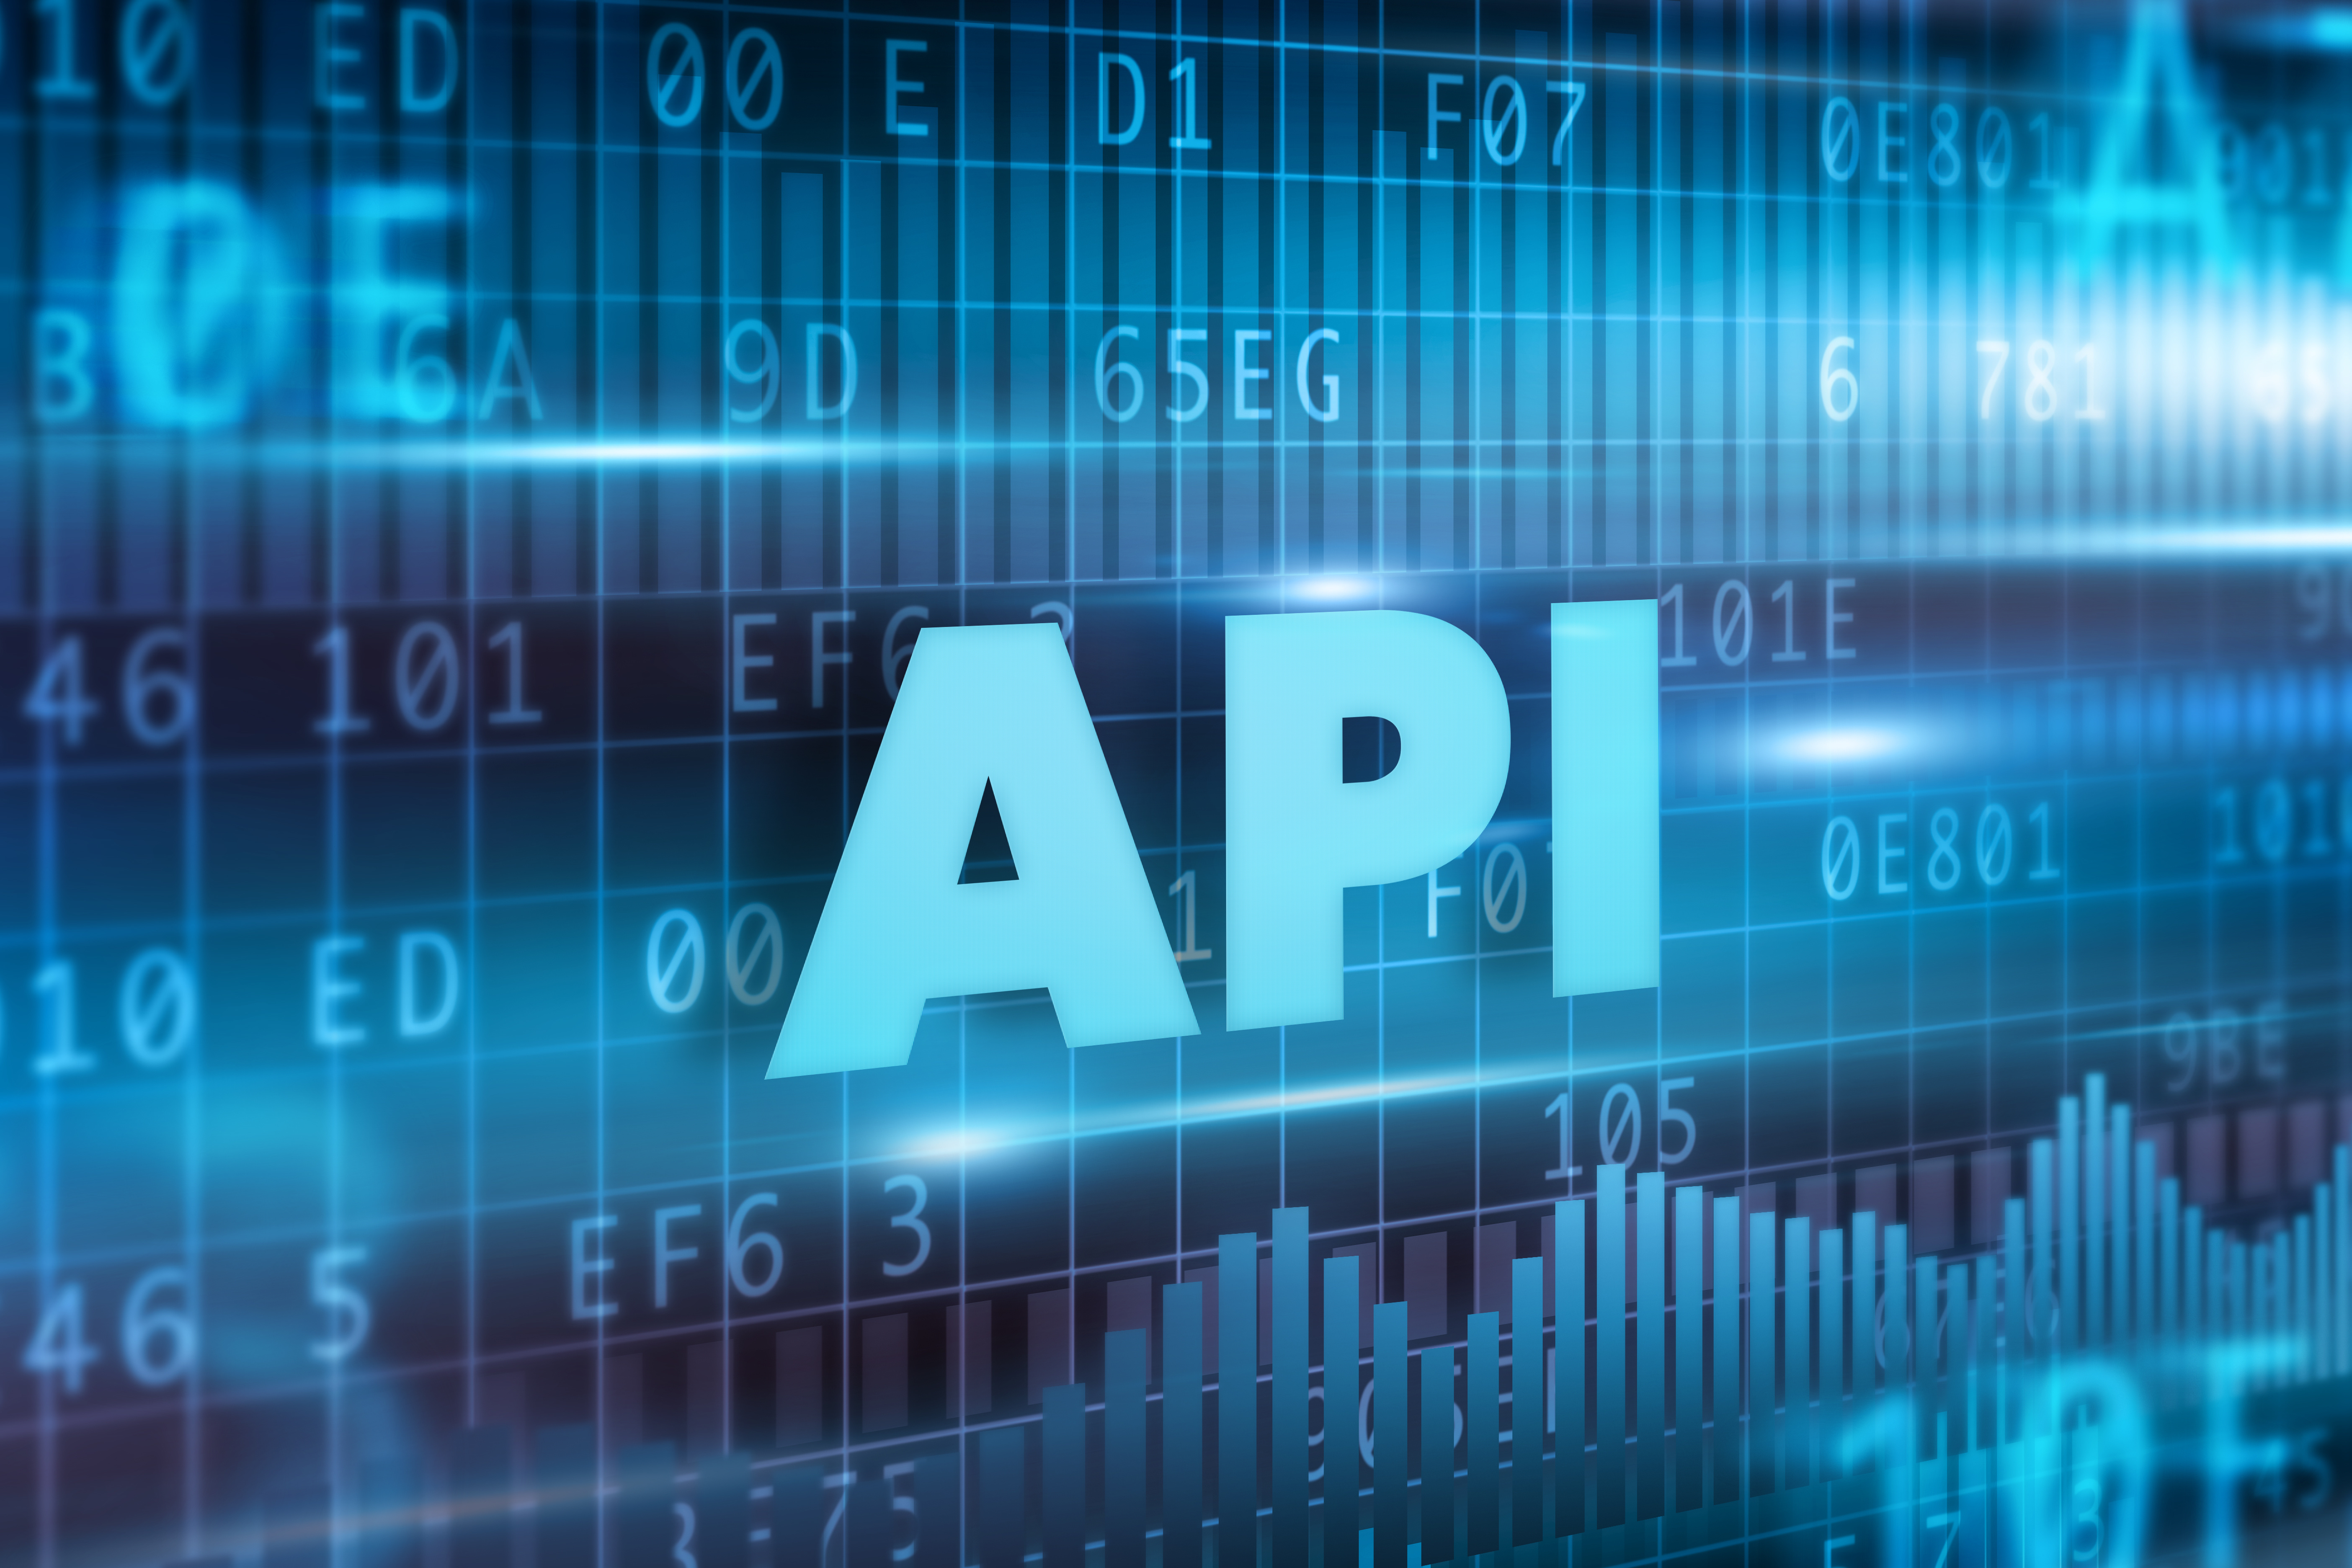 What Is An API?